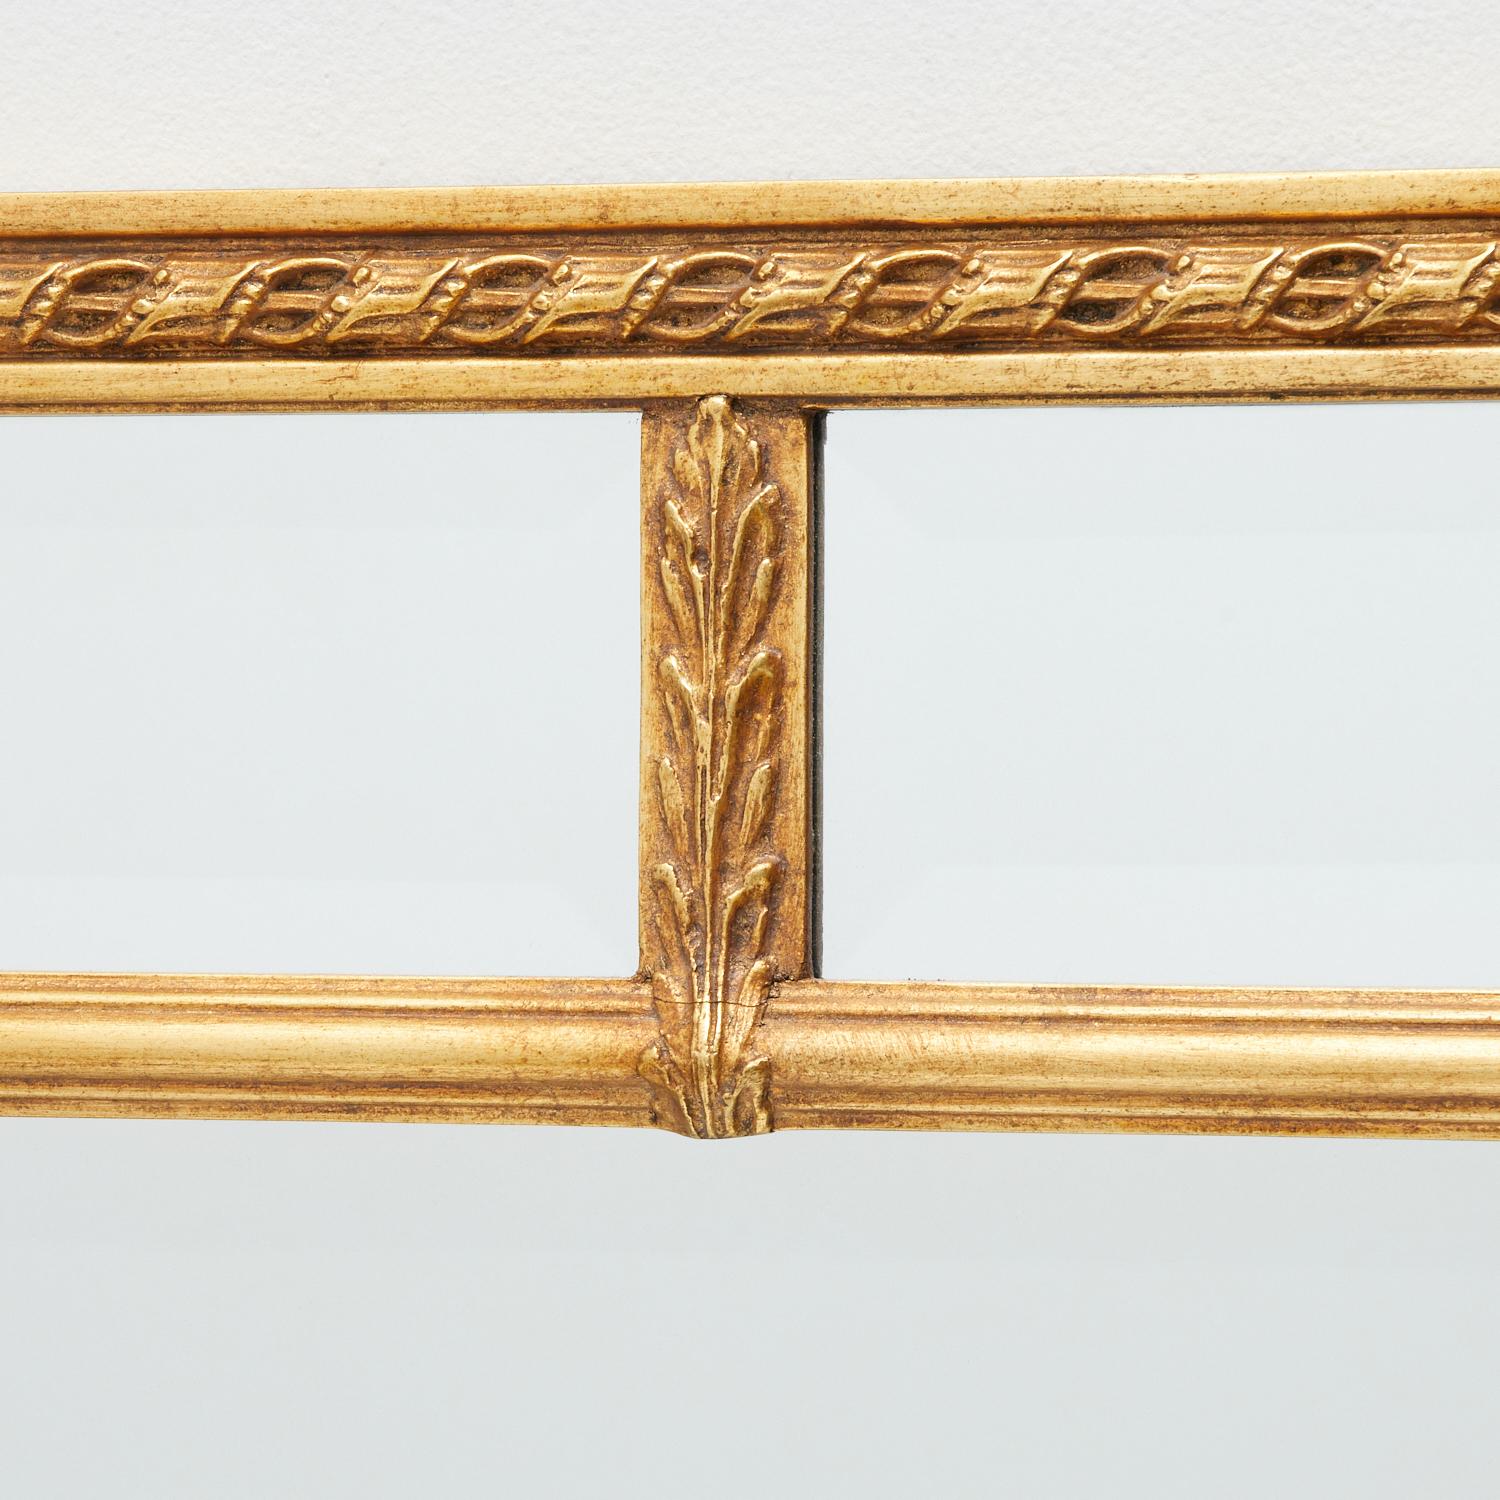 American 20th C. Carvers' Guild Regency Double Rectangle Mirror #1204 Antiqued Gold Leaf For Sale